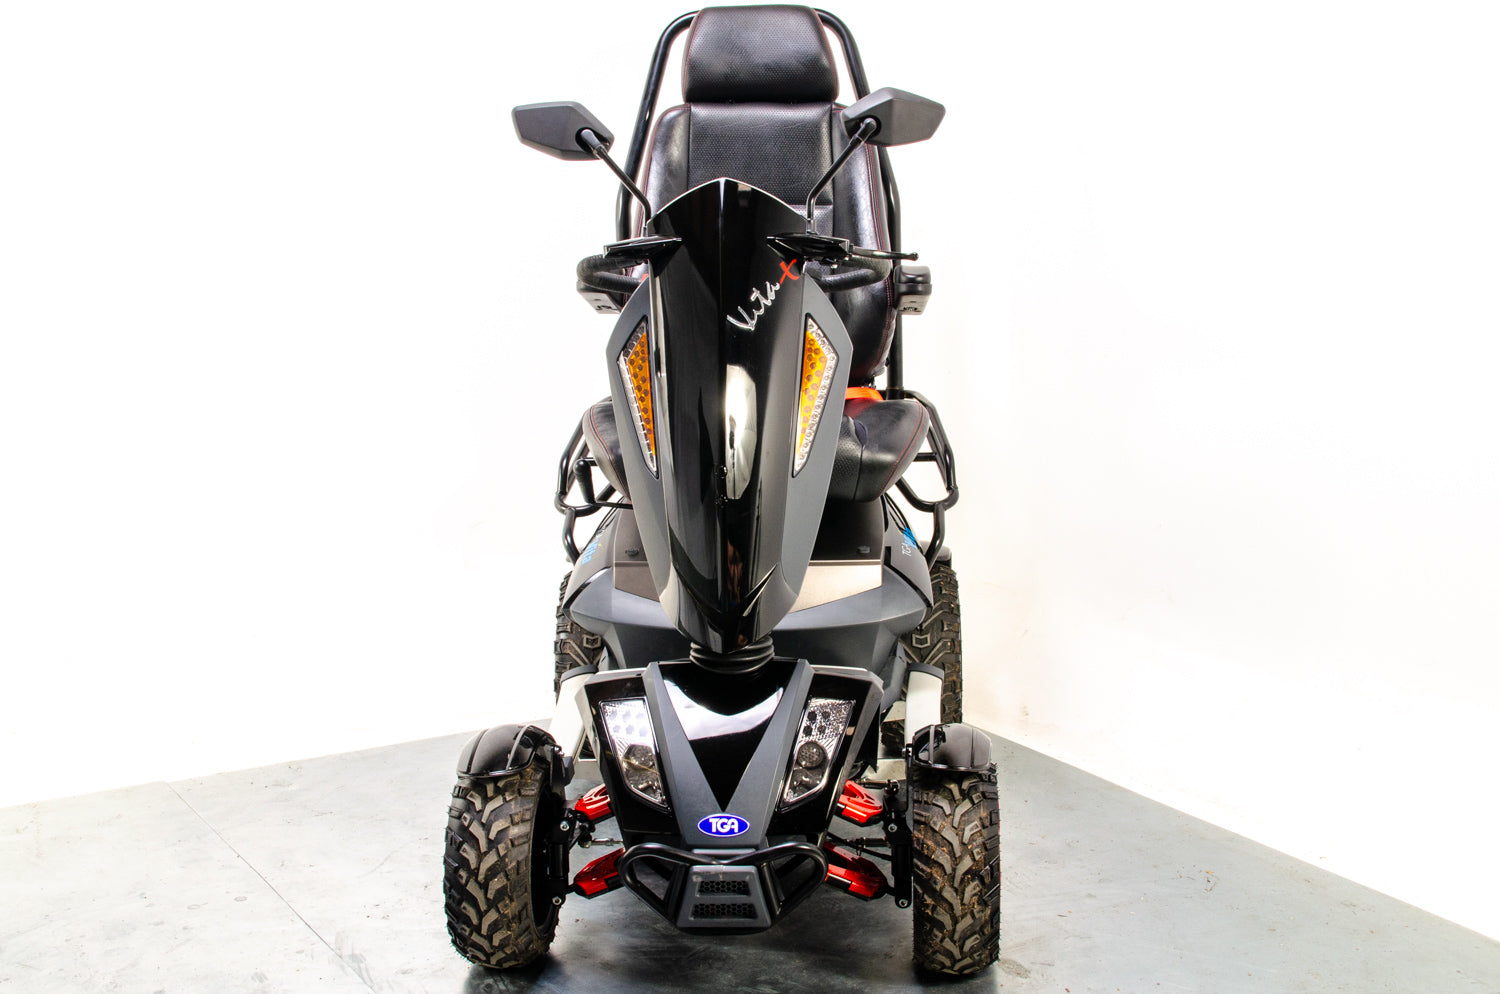 2020 TGA Vita X Used Mobility Scooter 8mph All-Terrain Off-Road Large Road Legal 13299